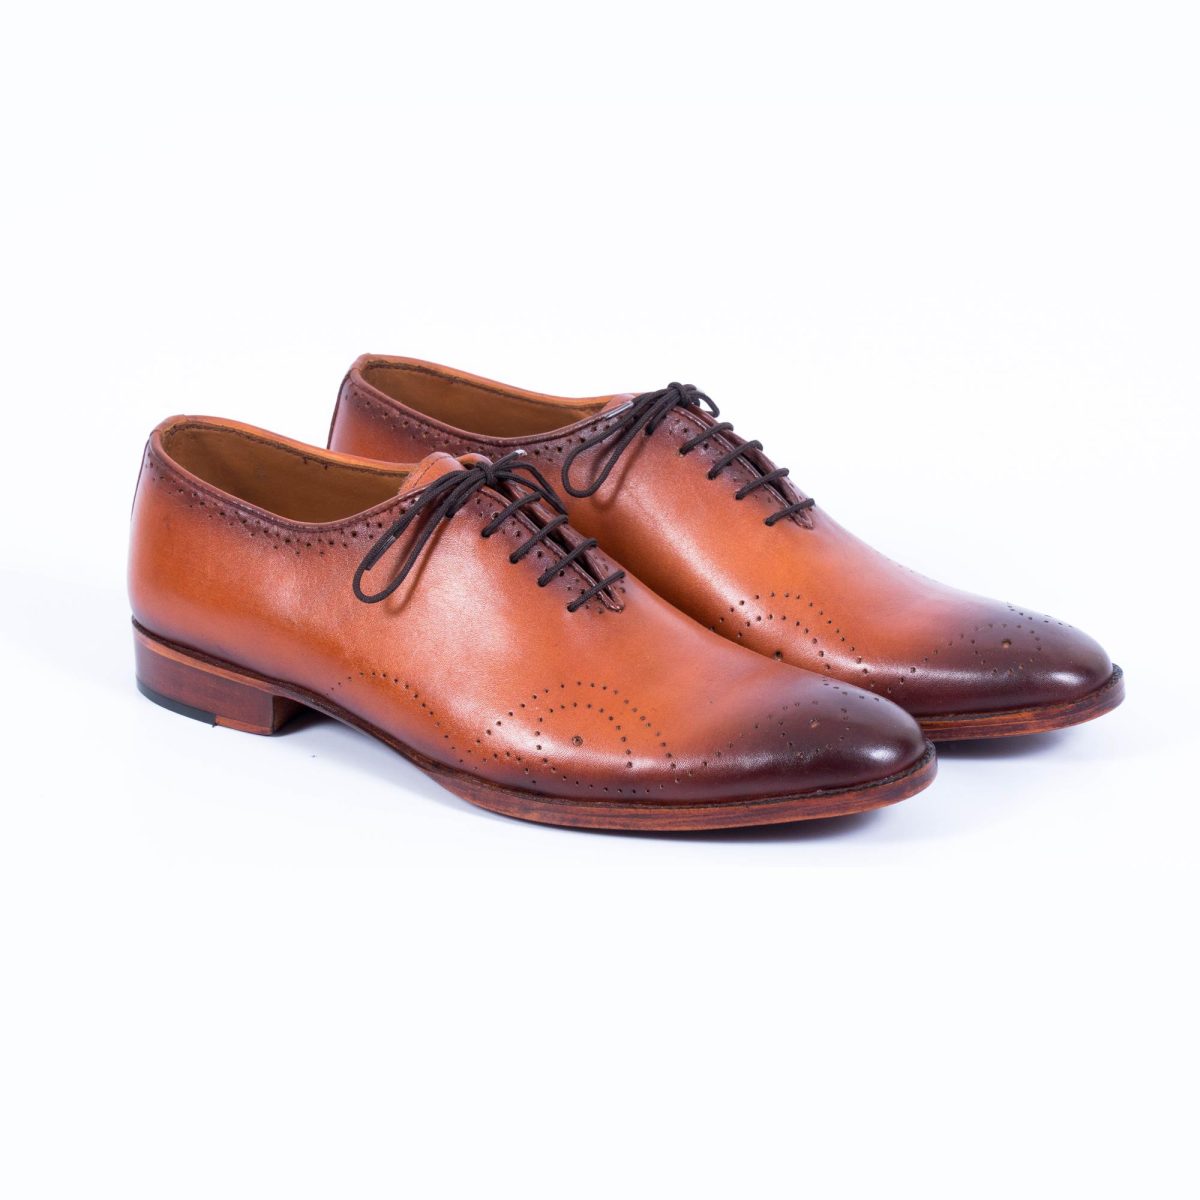 Spadera Handmade Leather Shoes - Experto Wing